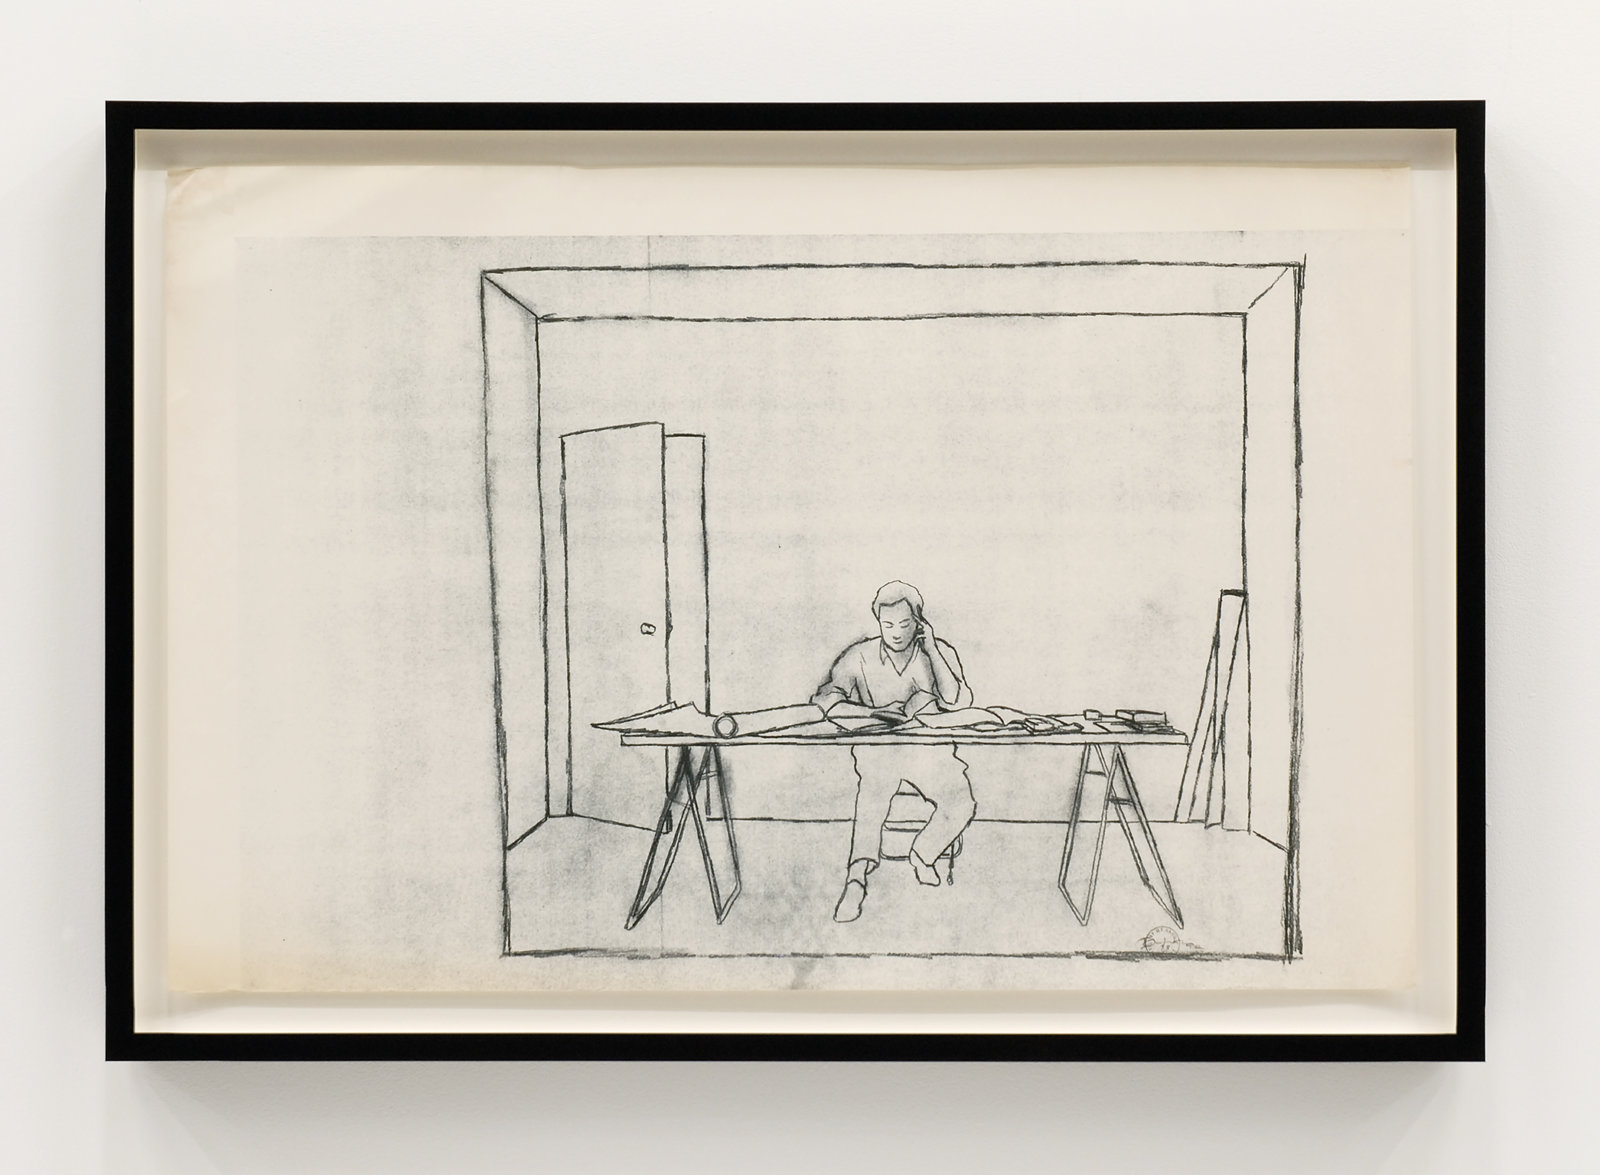 Ian Wallace, At Work 1983, 1983, dyazoprint from graphite on paper drawing, 22 x 34 in. (56 x 86 cm)